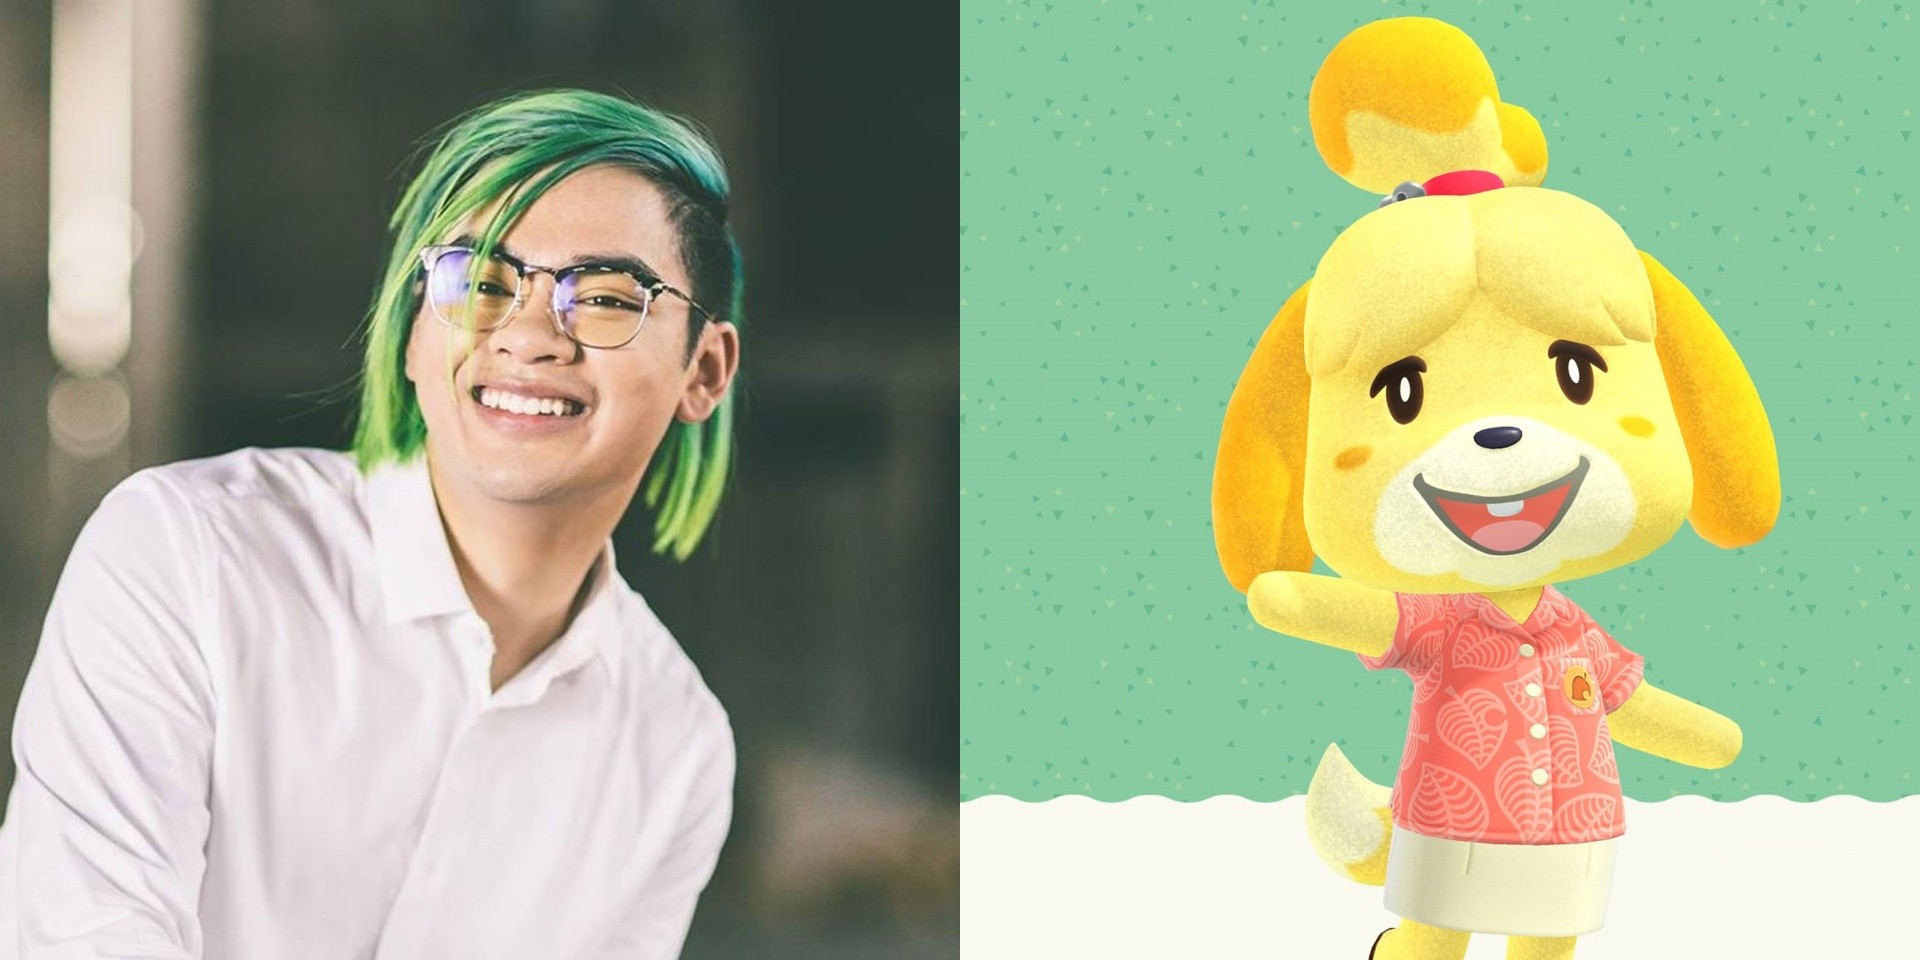 Shawn Wasabi drops playful Animal Crossing tribute in time for game release – listen